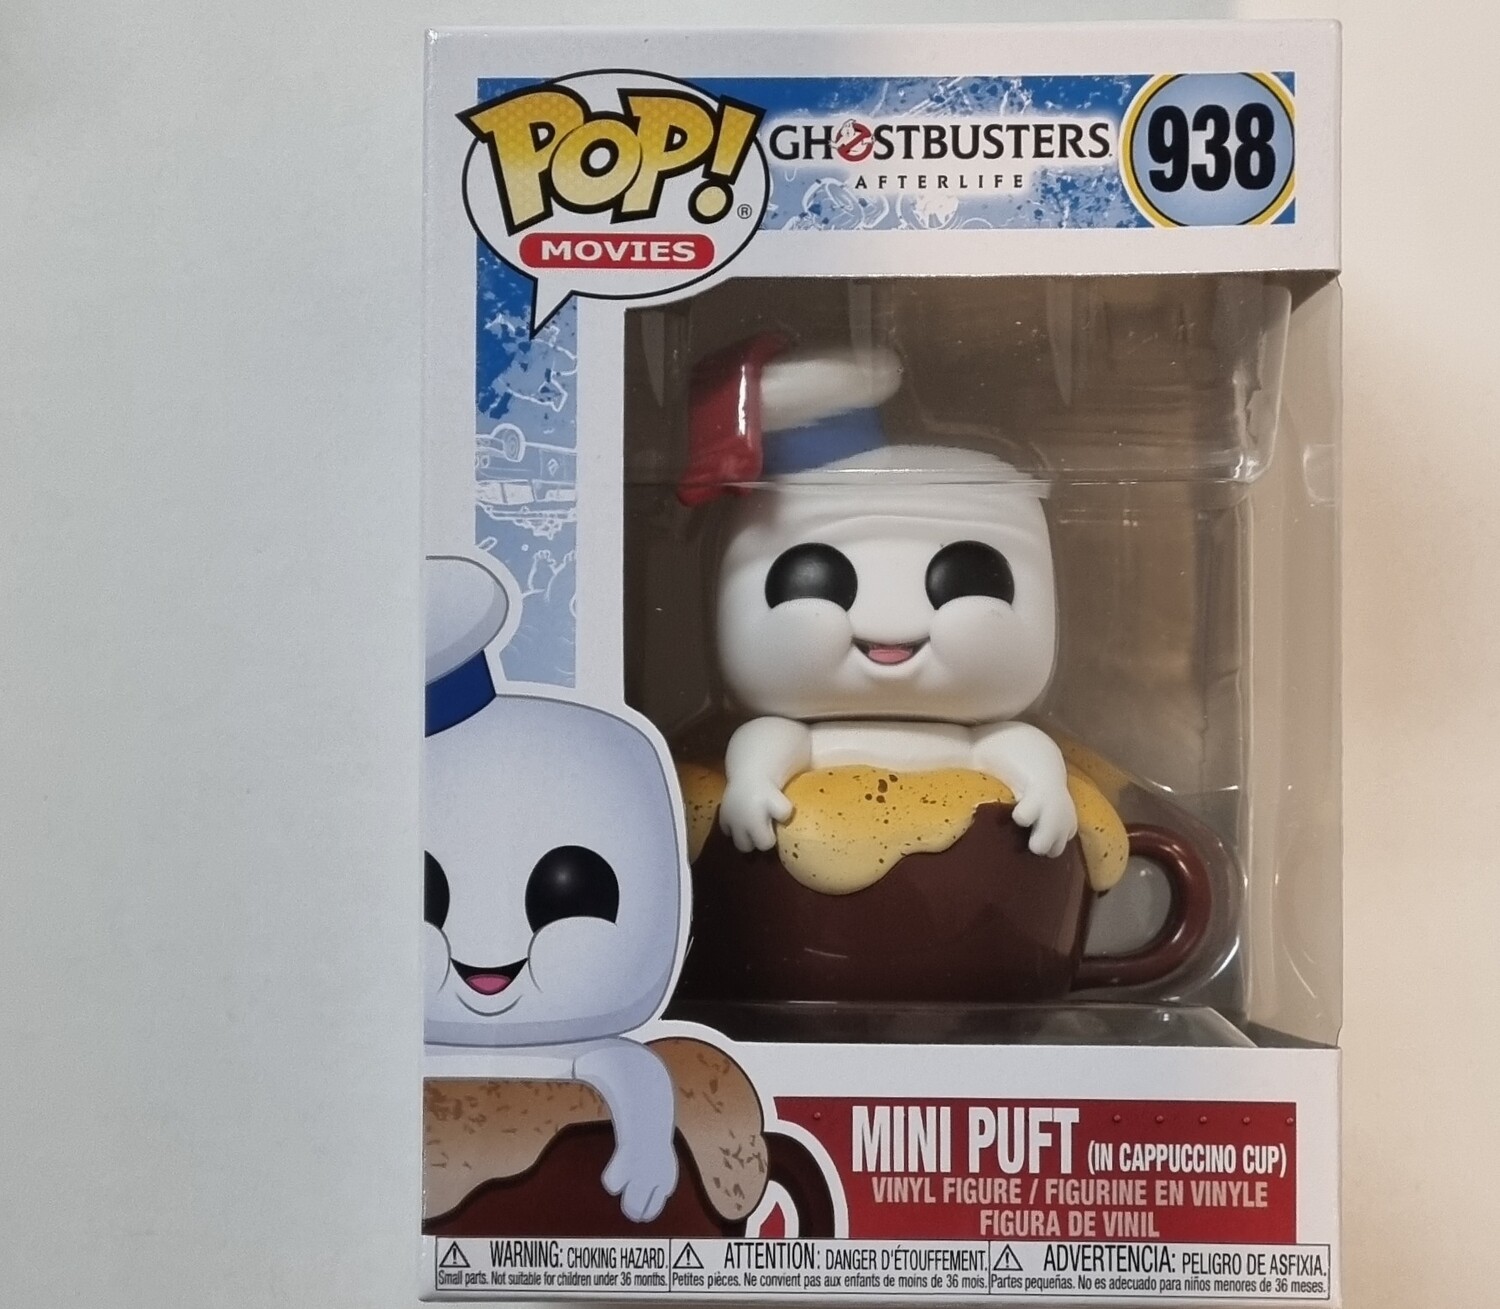 Funko Pop!, Mini Puft in Cappuccino Cup, #938, Movies, Ghostbuster Afterlife